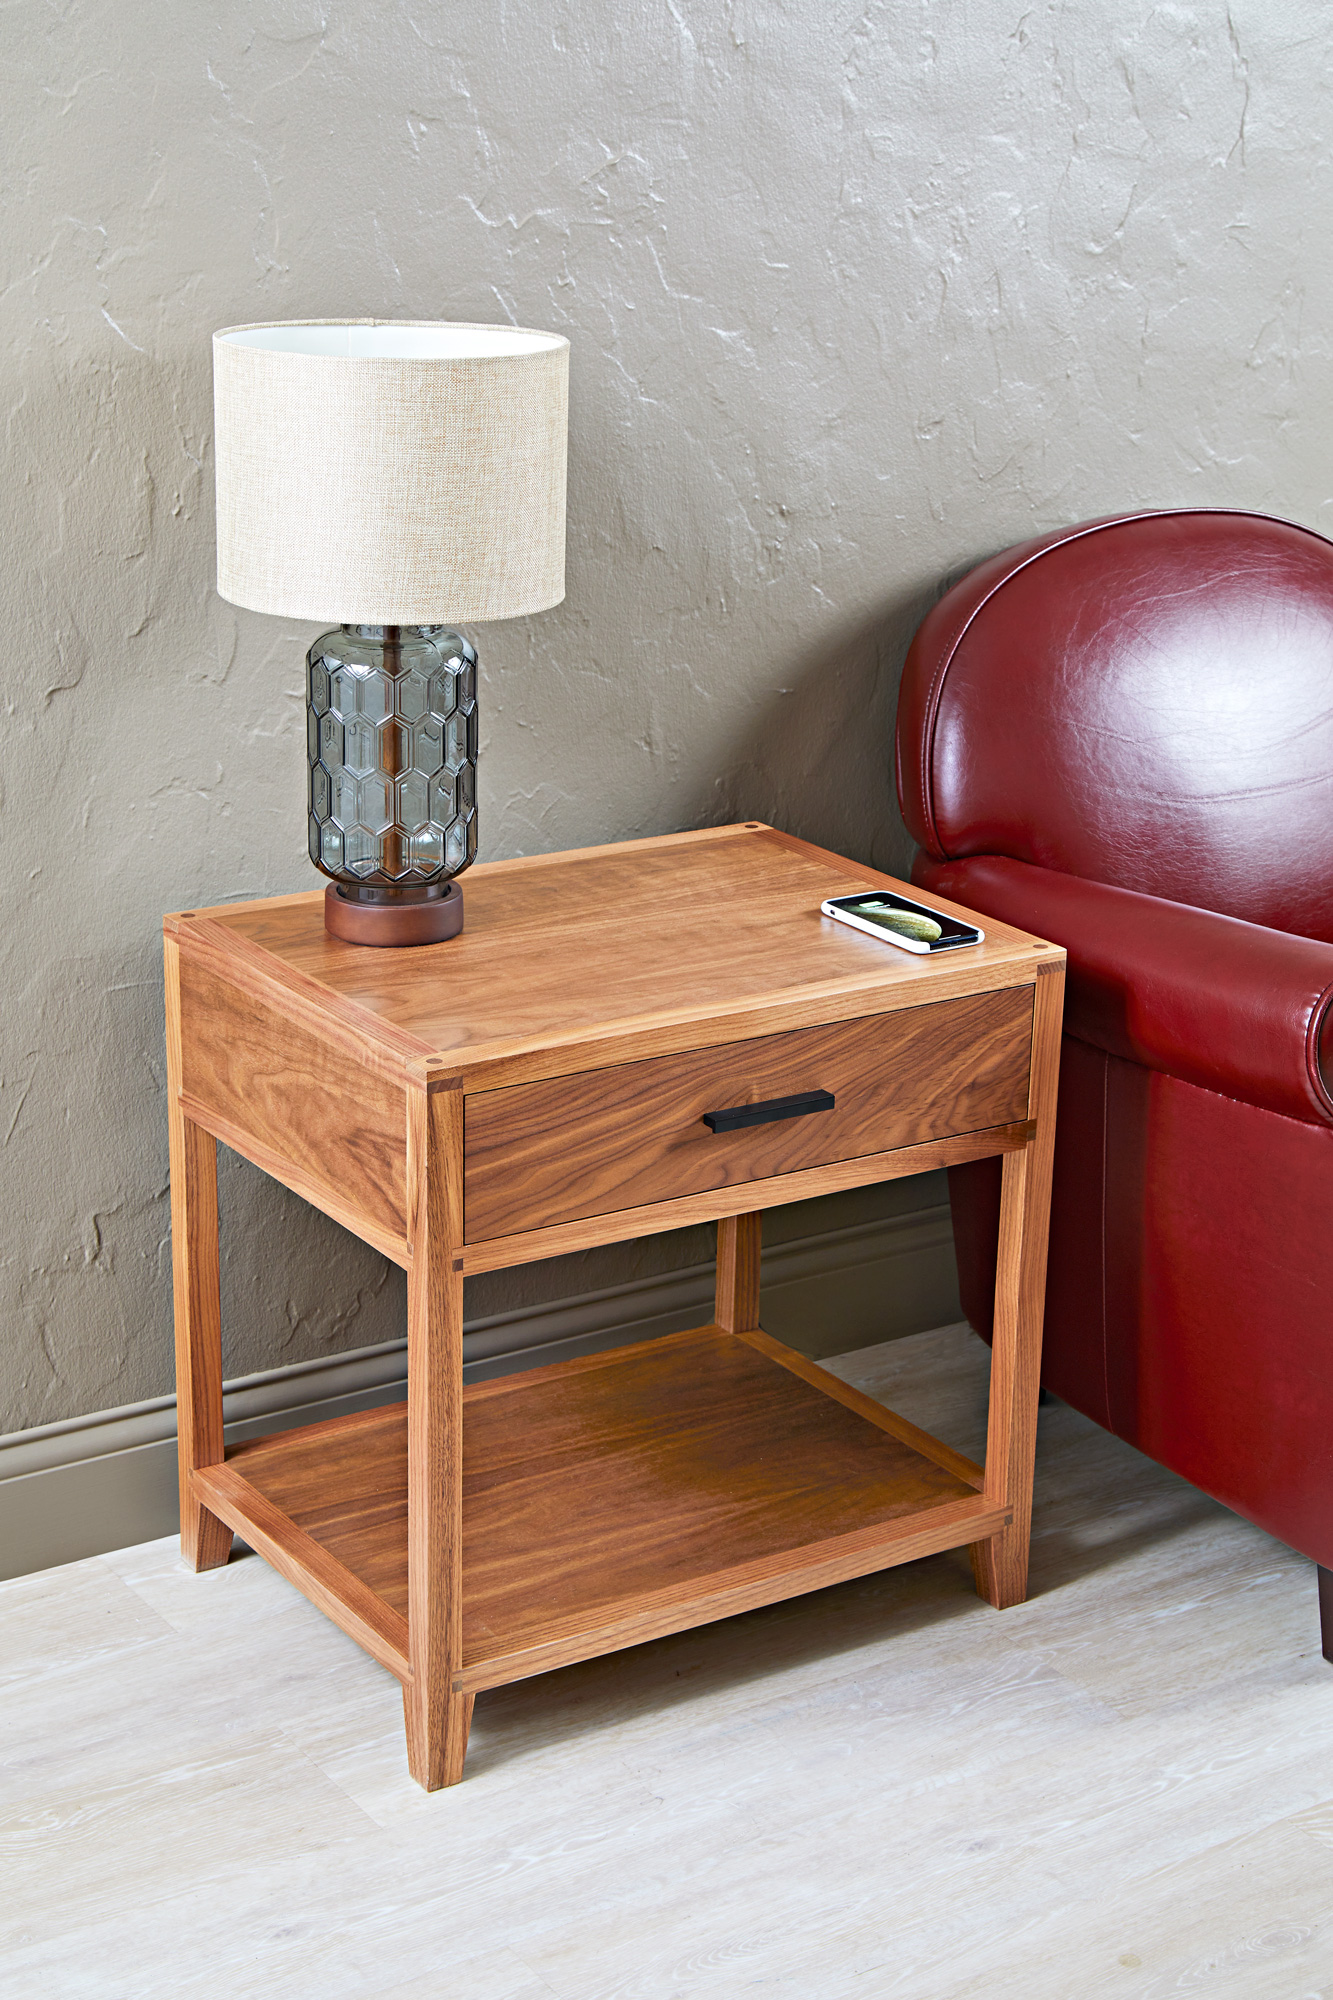 Walnut End Table with Built-in Phone Charger